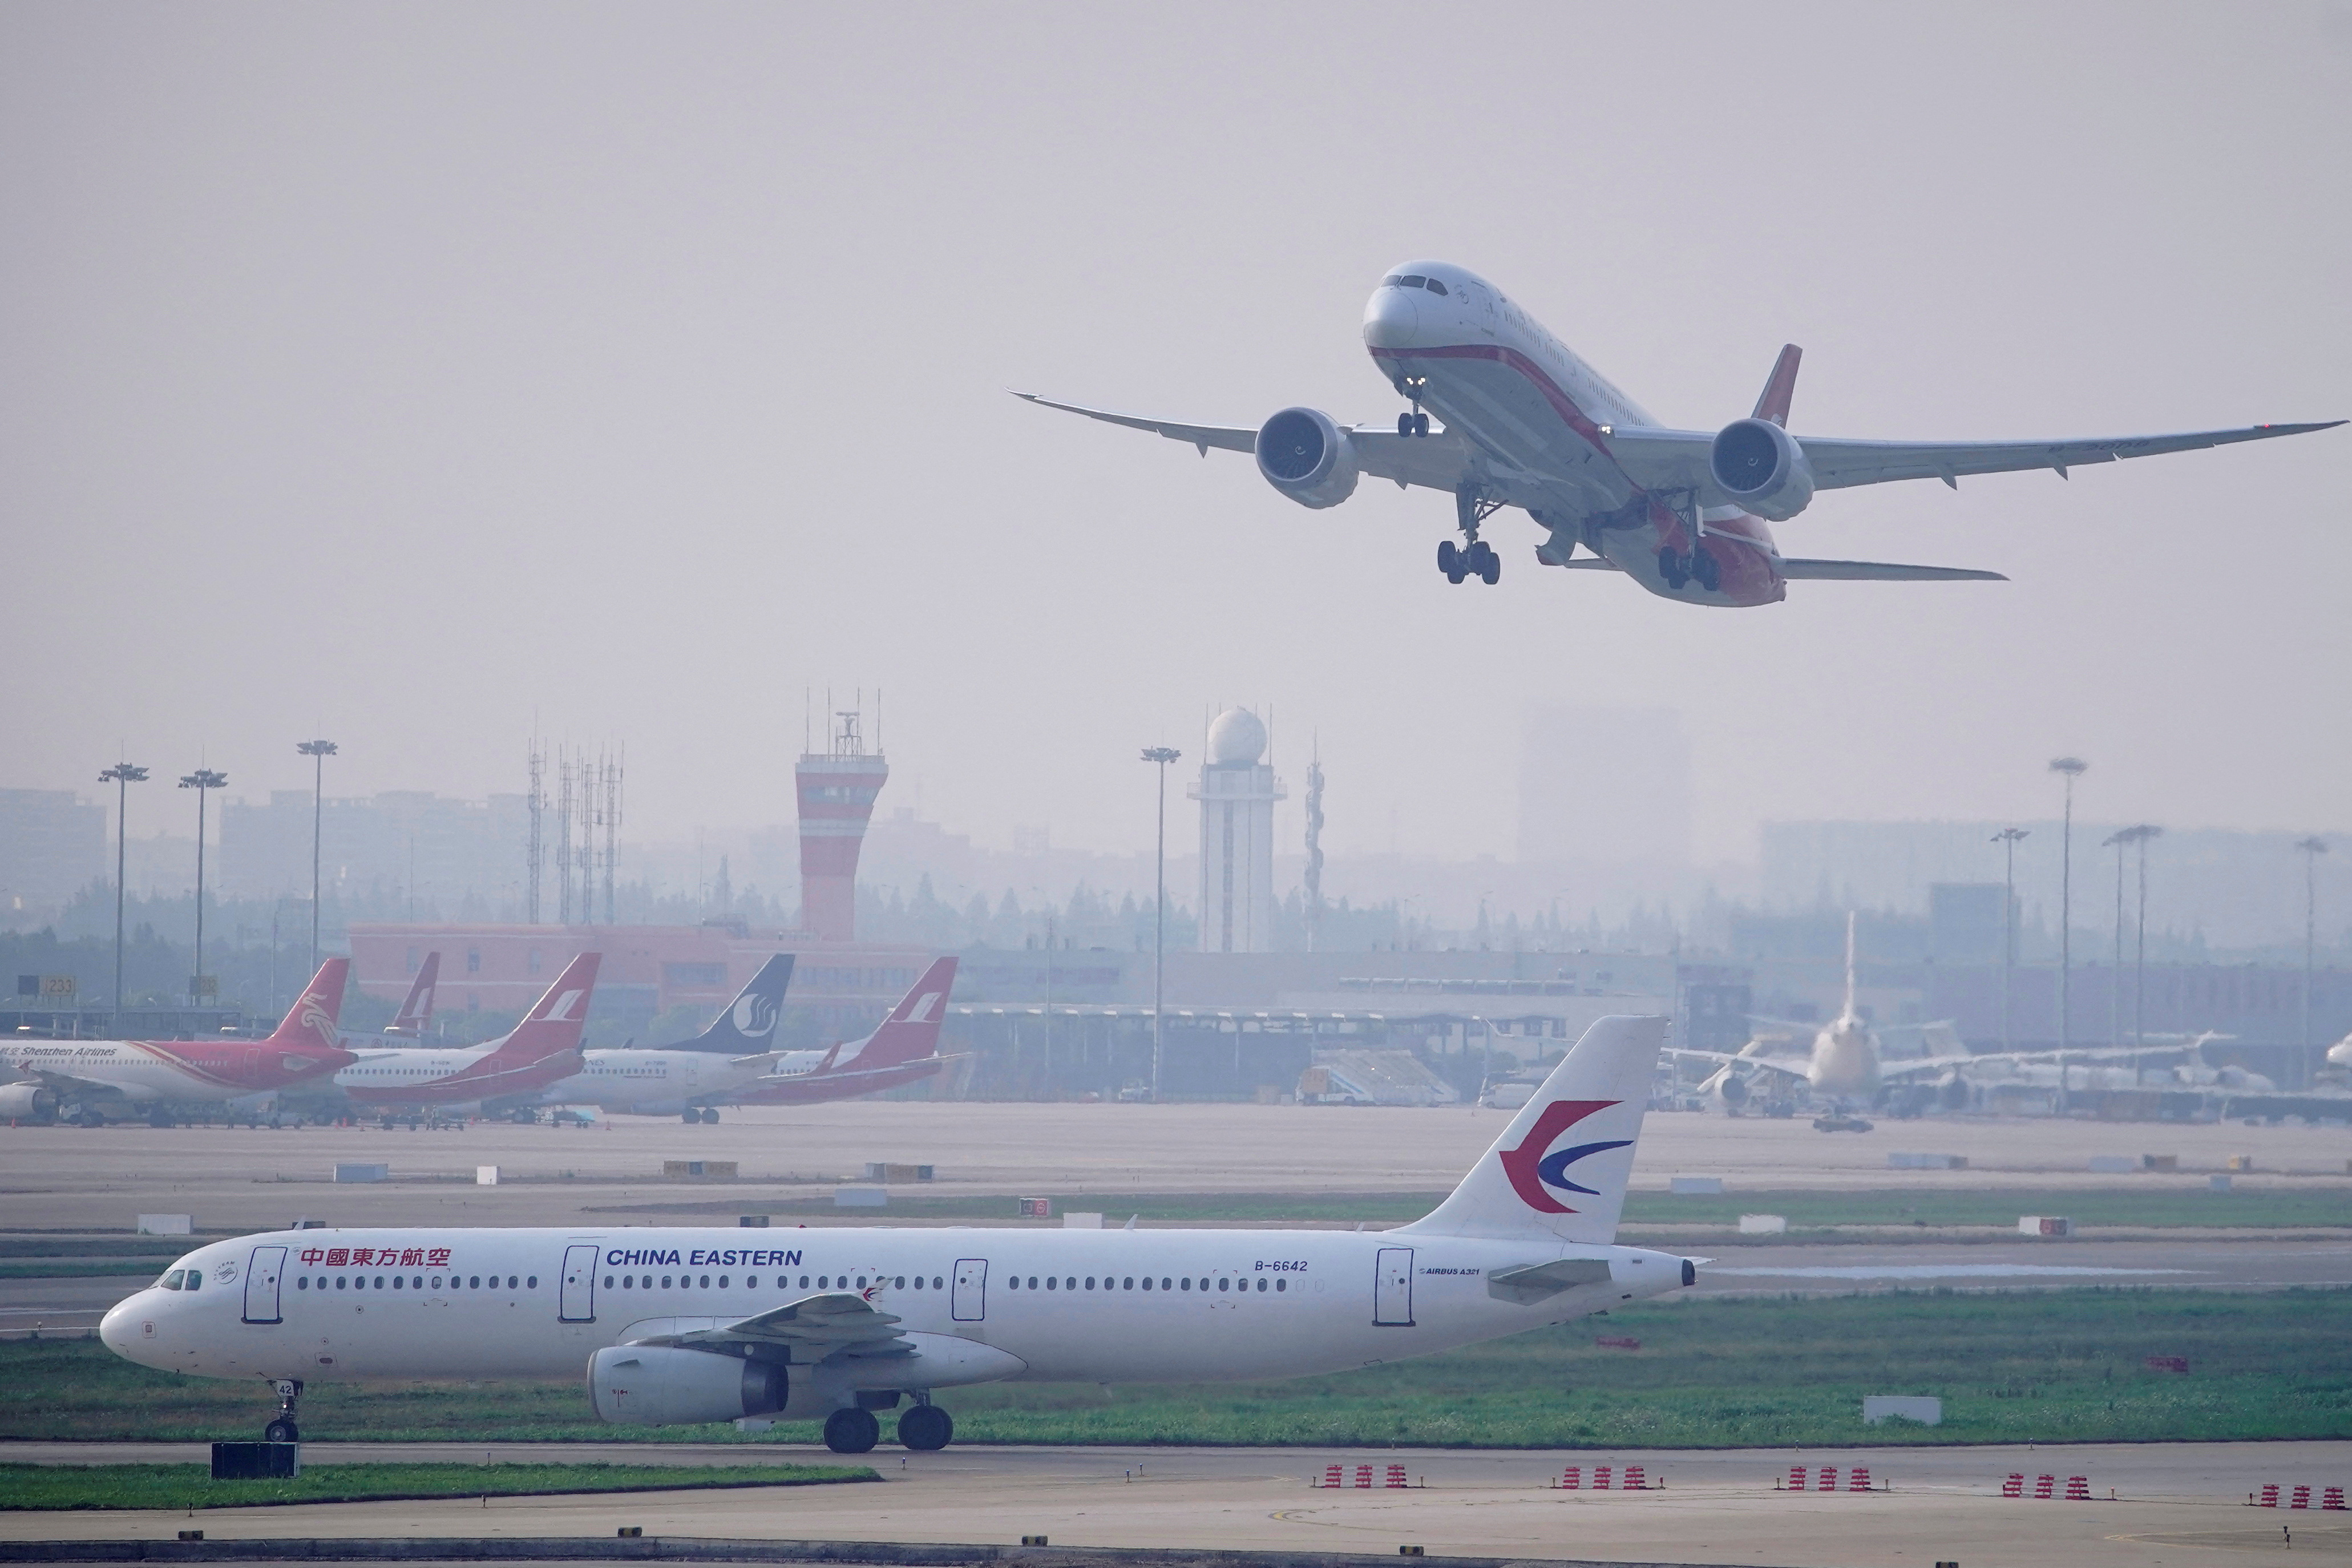 A China Eastern Airlines aircraft and  Shanghai Airlines aircraft are seen in Hongqiao International Airport in Shanghai